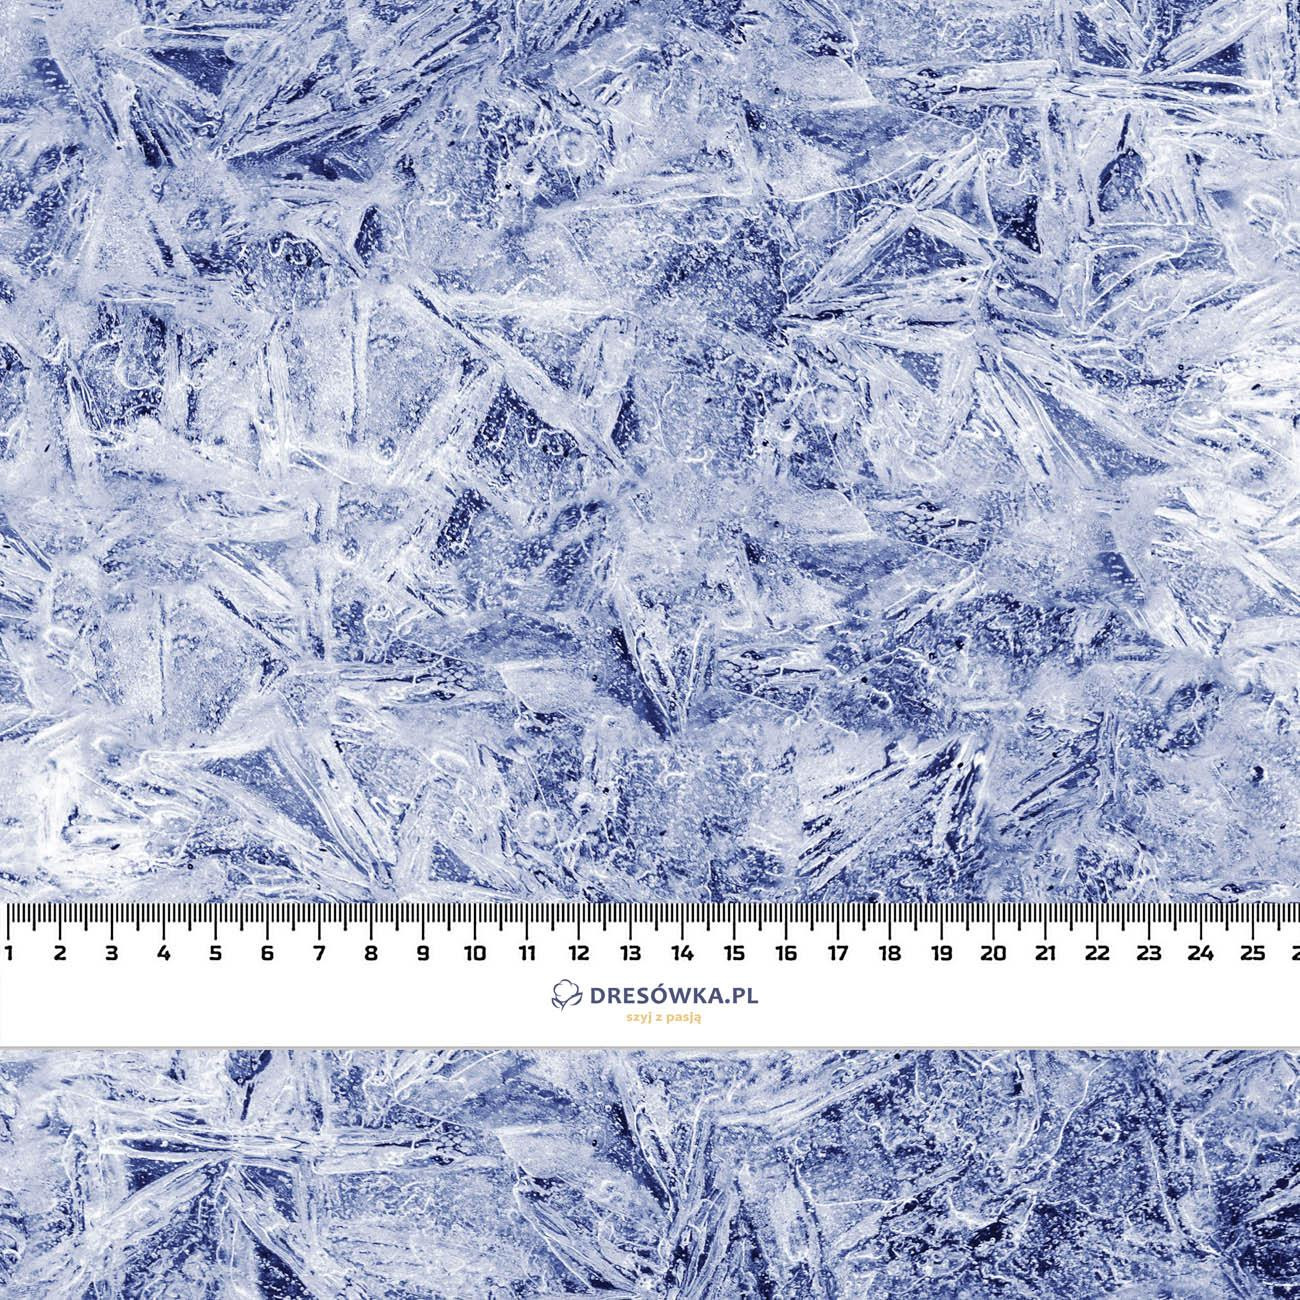 FROST pat. 2 / blue (PAINTED ON GLASS) - Waterproof woven fabric